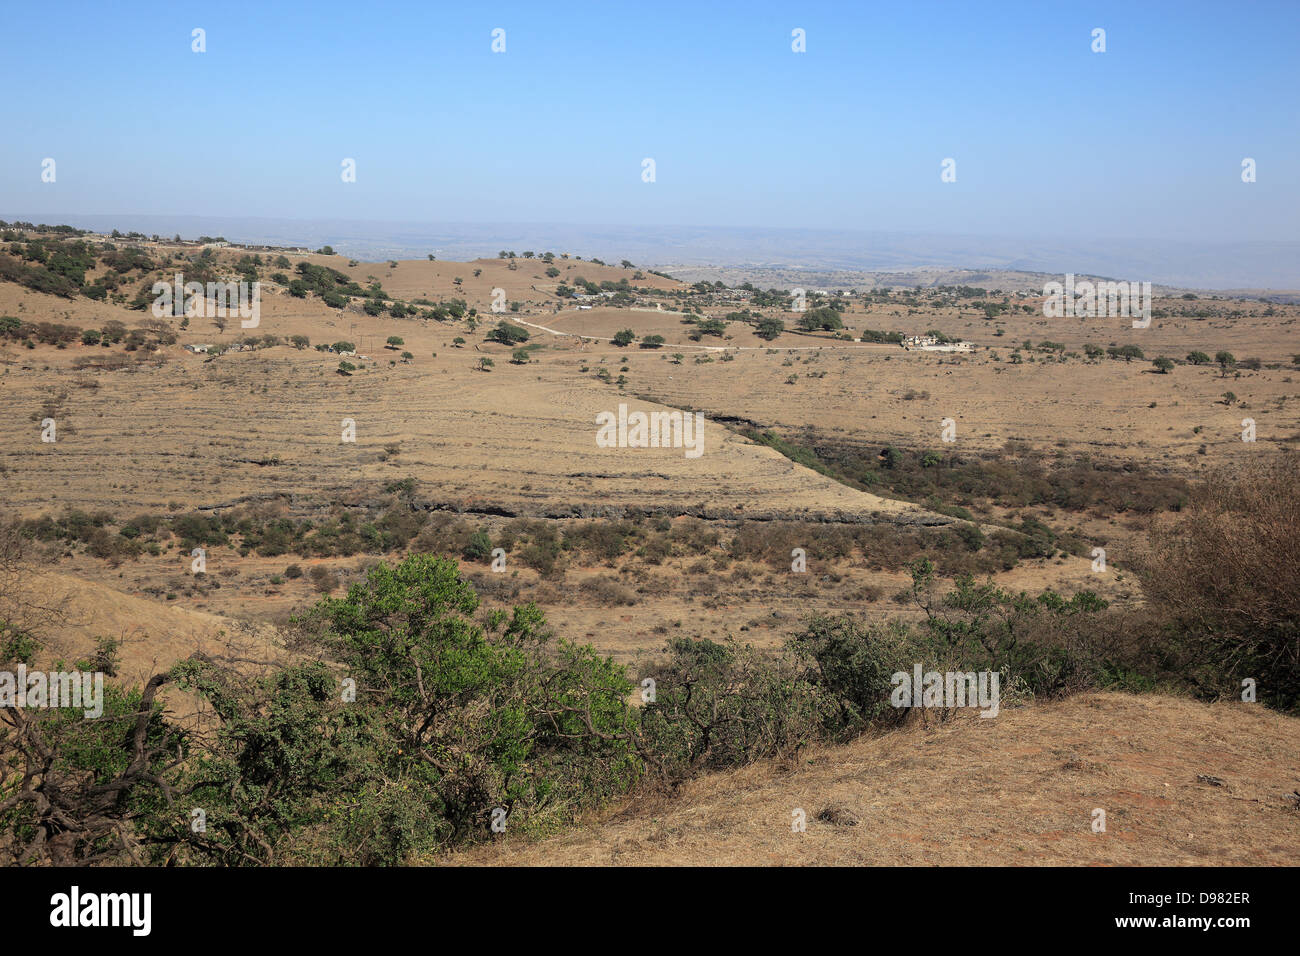 Scenery in southern Oman Stock Photo